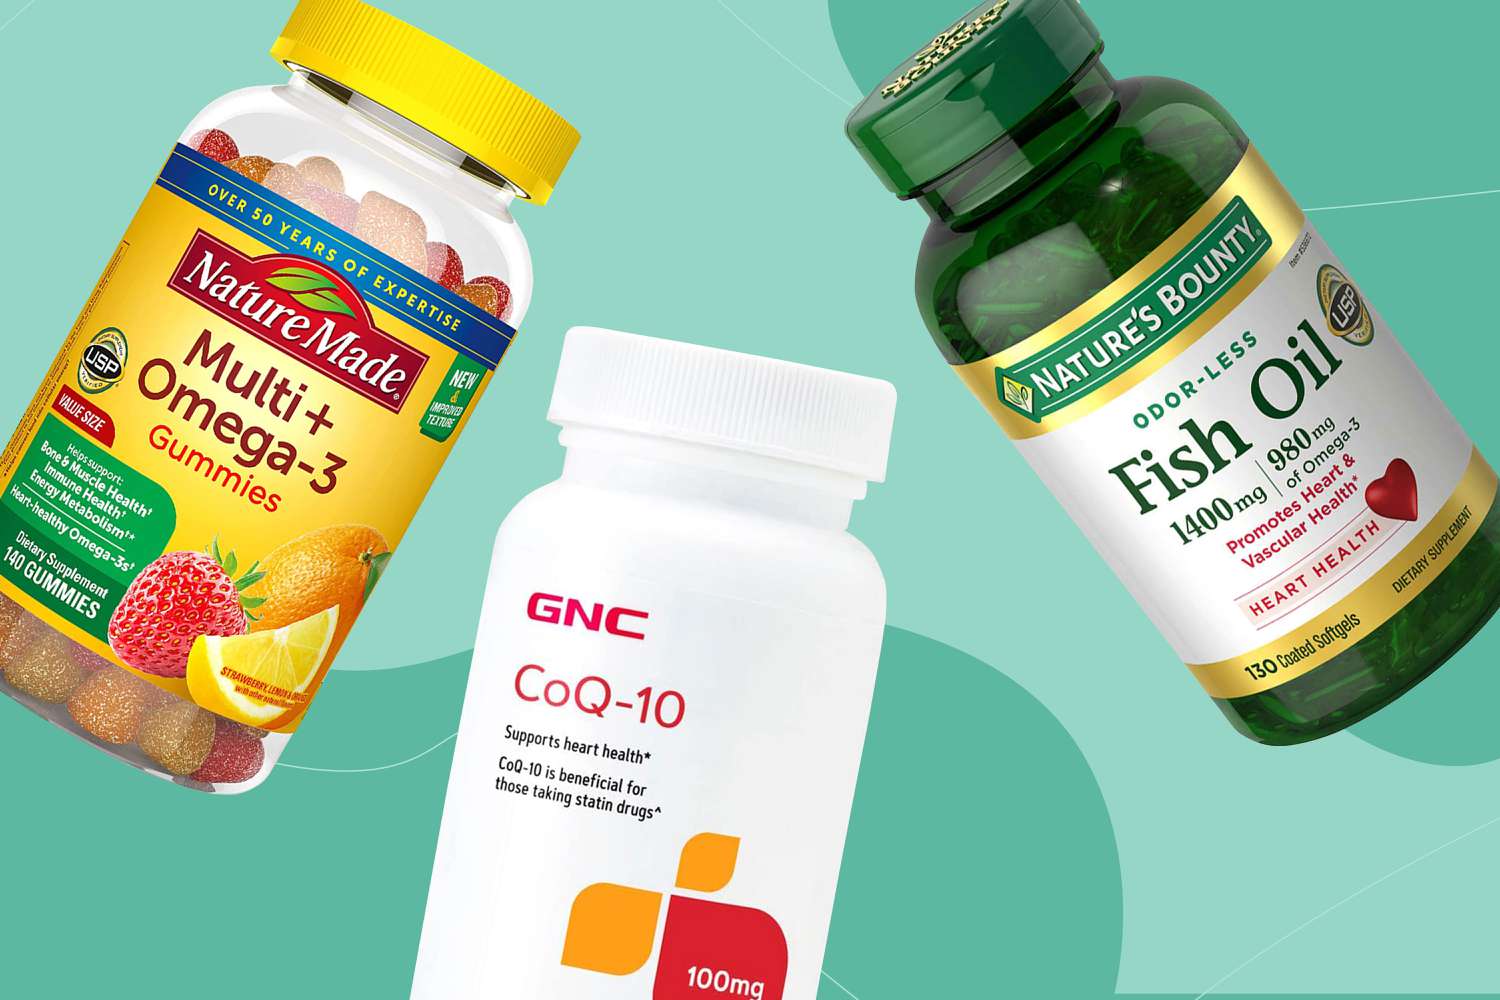 Vitamin Value: Which Vitamins Suit Your Skin Type Best?